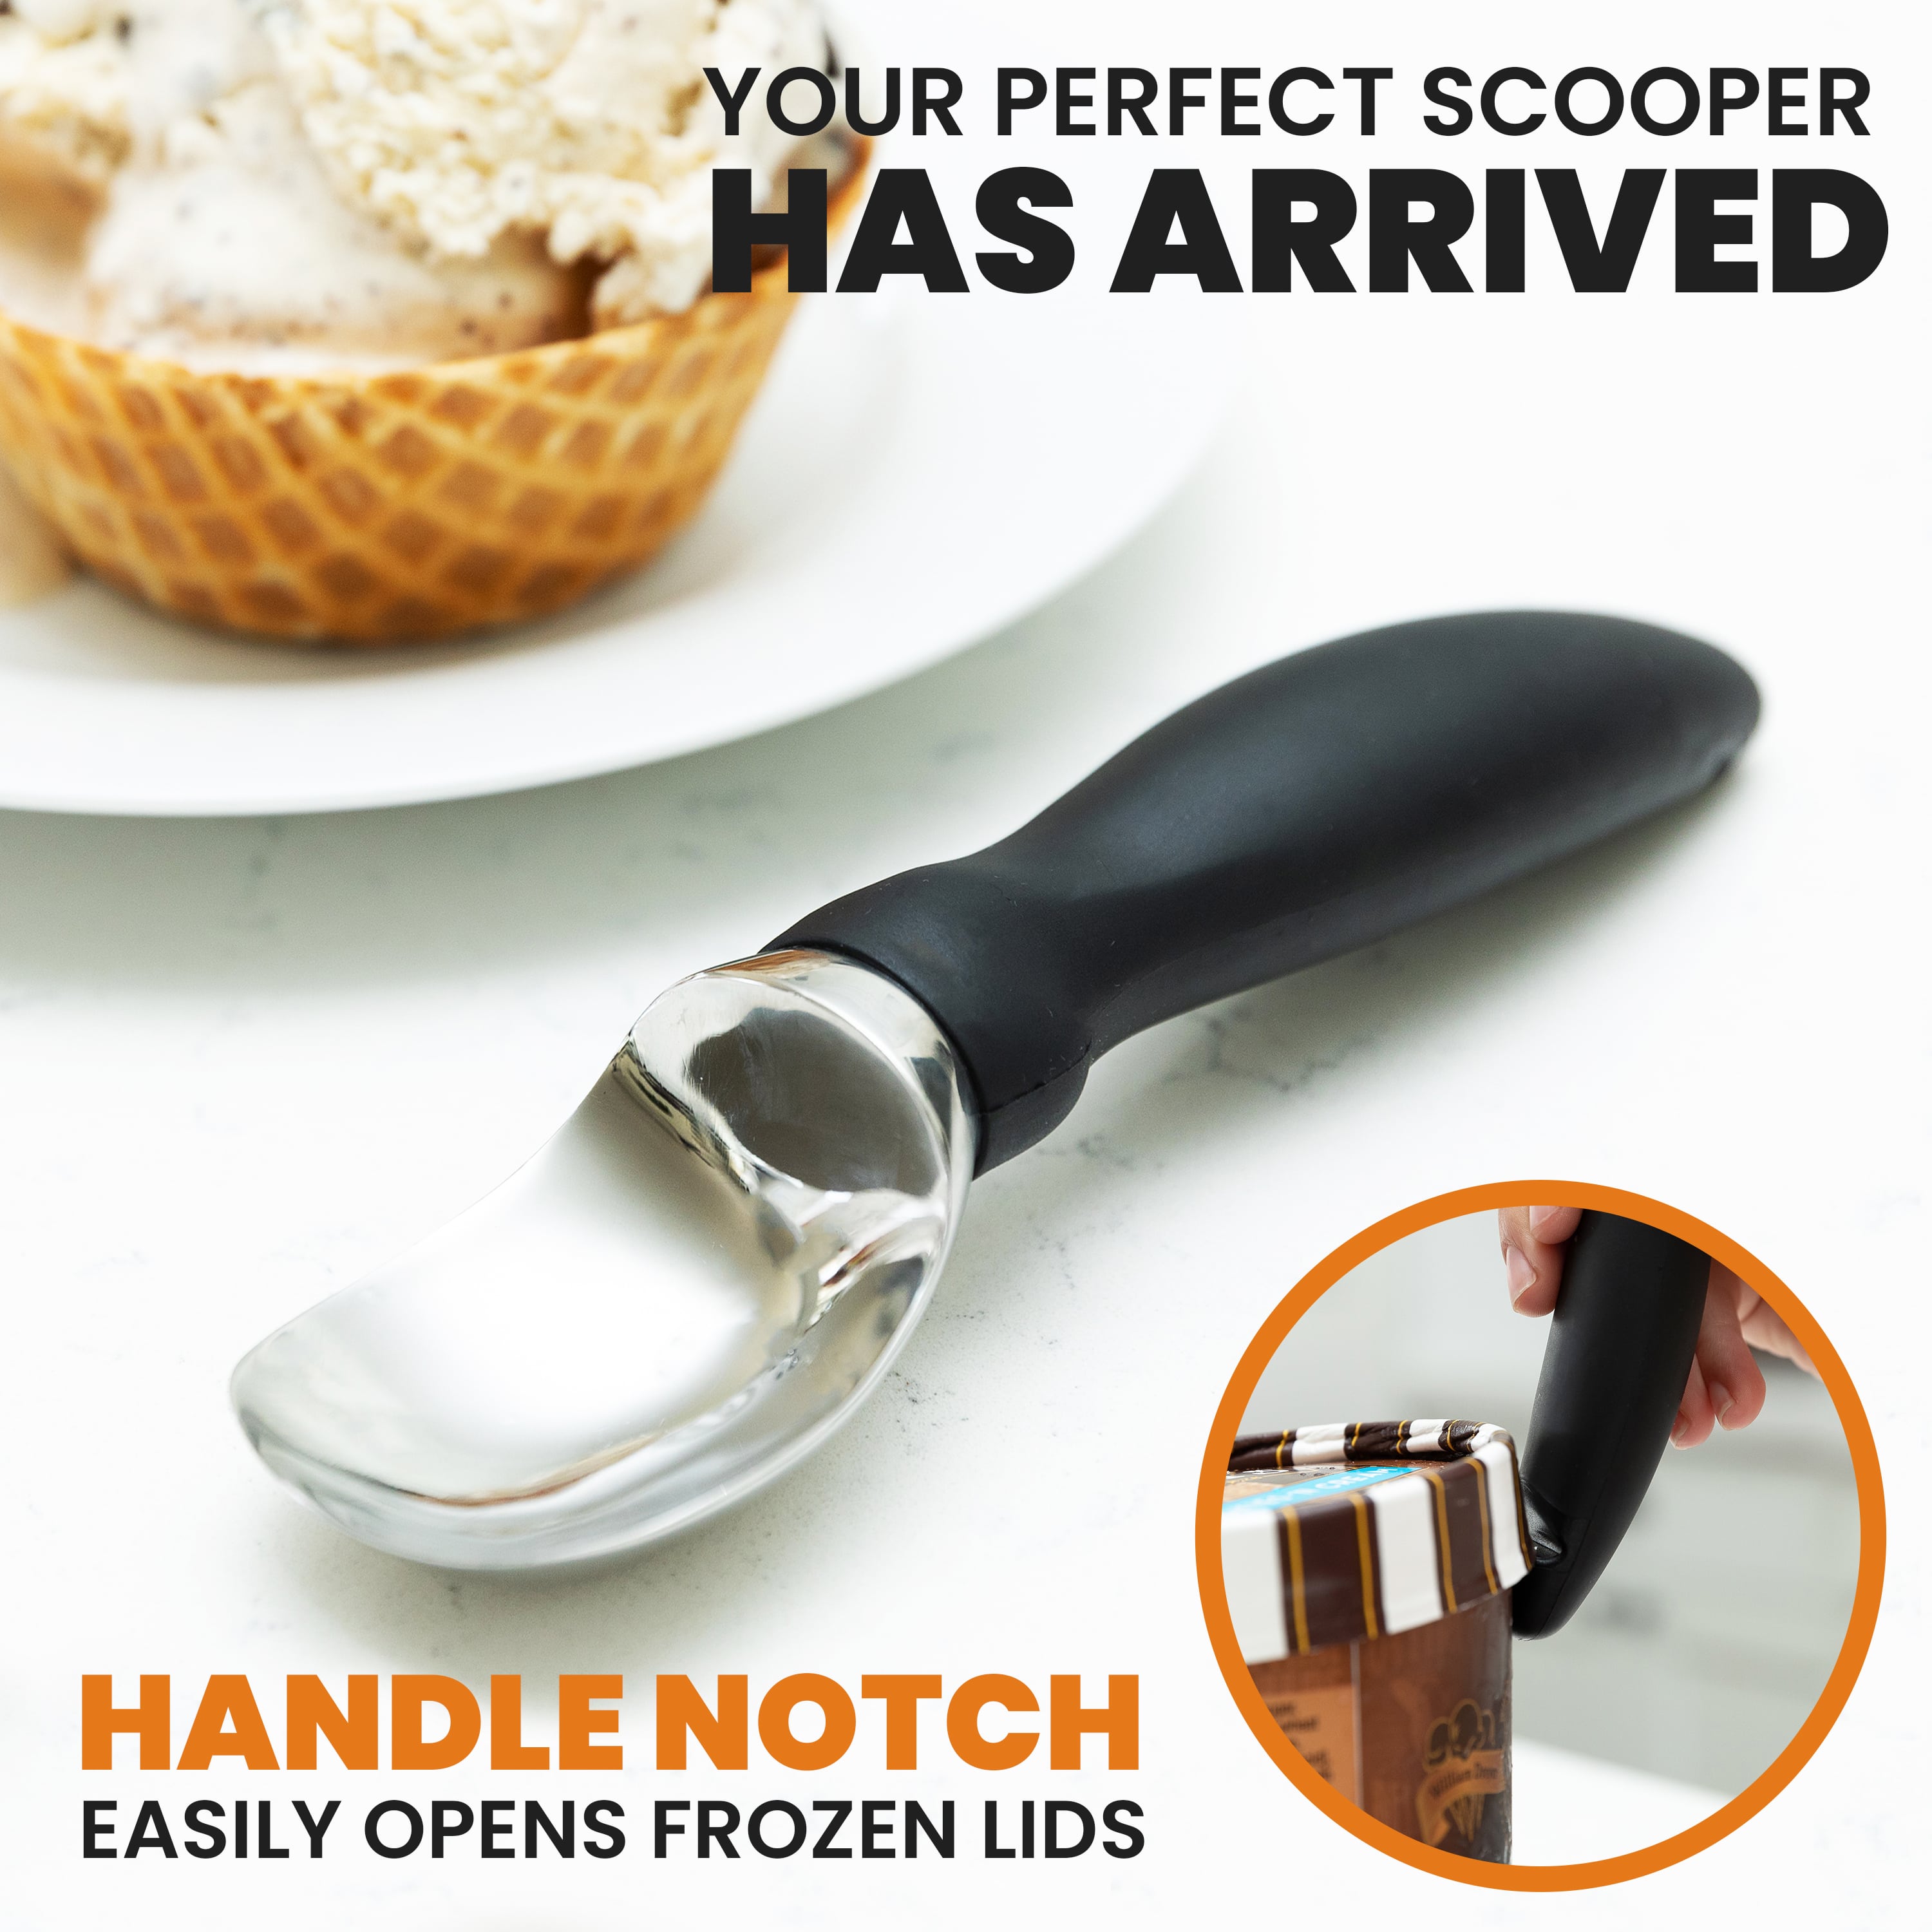 Penni's Pampered Chef - Newly upgraded ice cream scoop! The scoop has a  pointed head and scalloped edges to make digging into hard ice cream easy  work. The handle is designed to